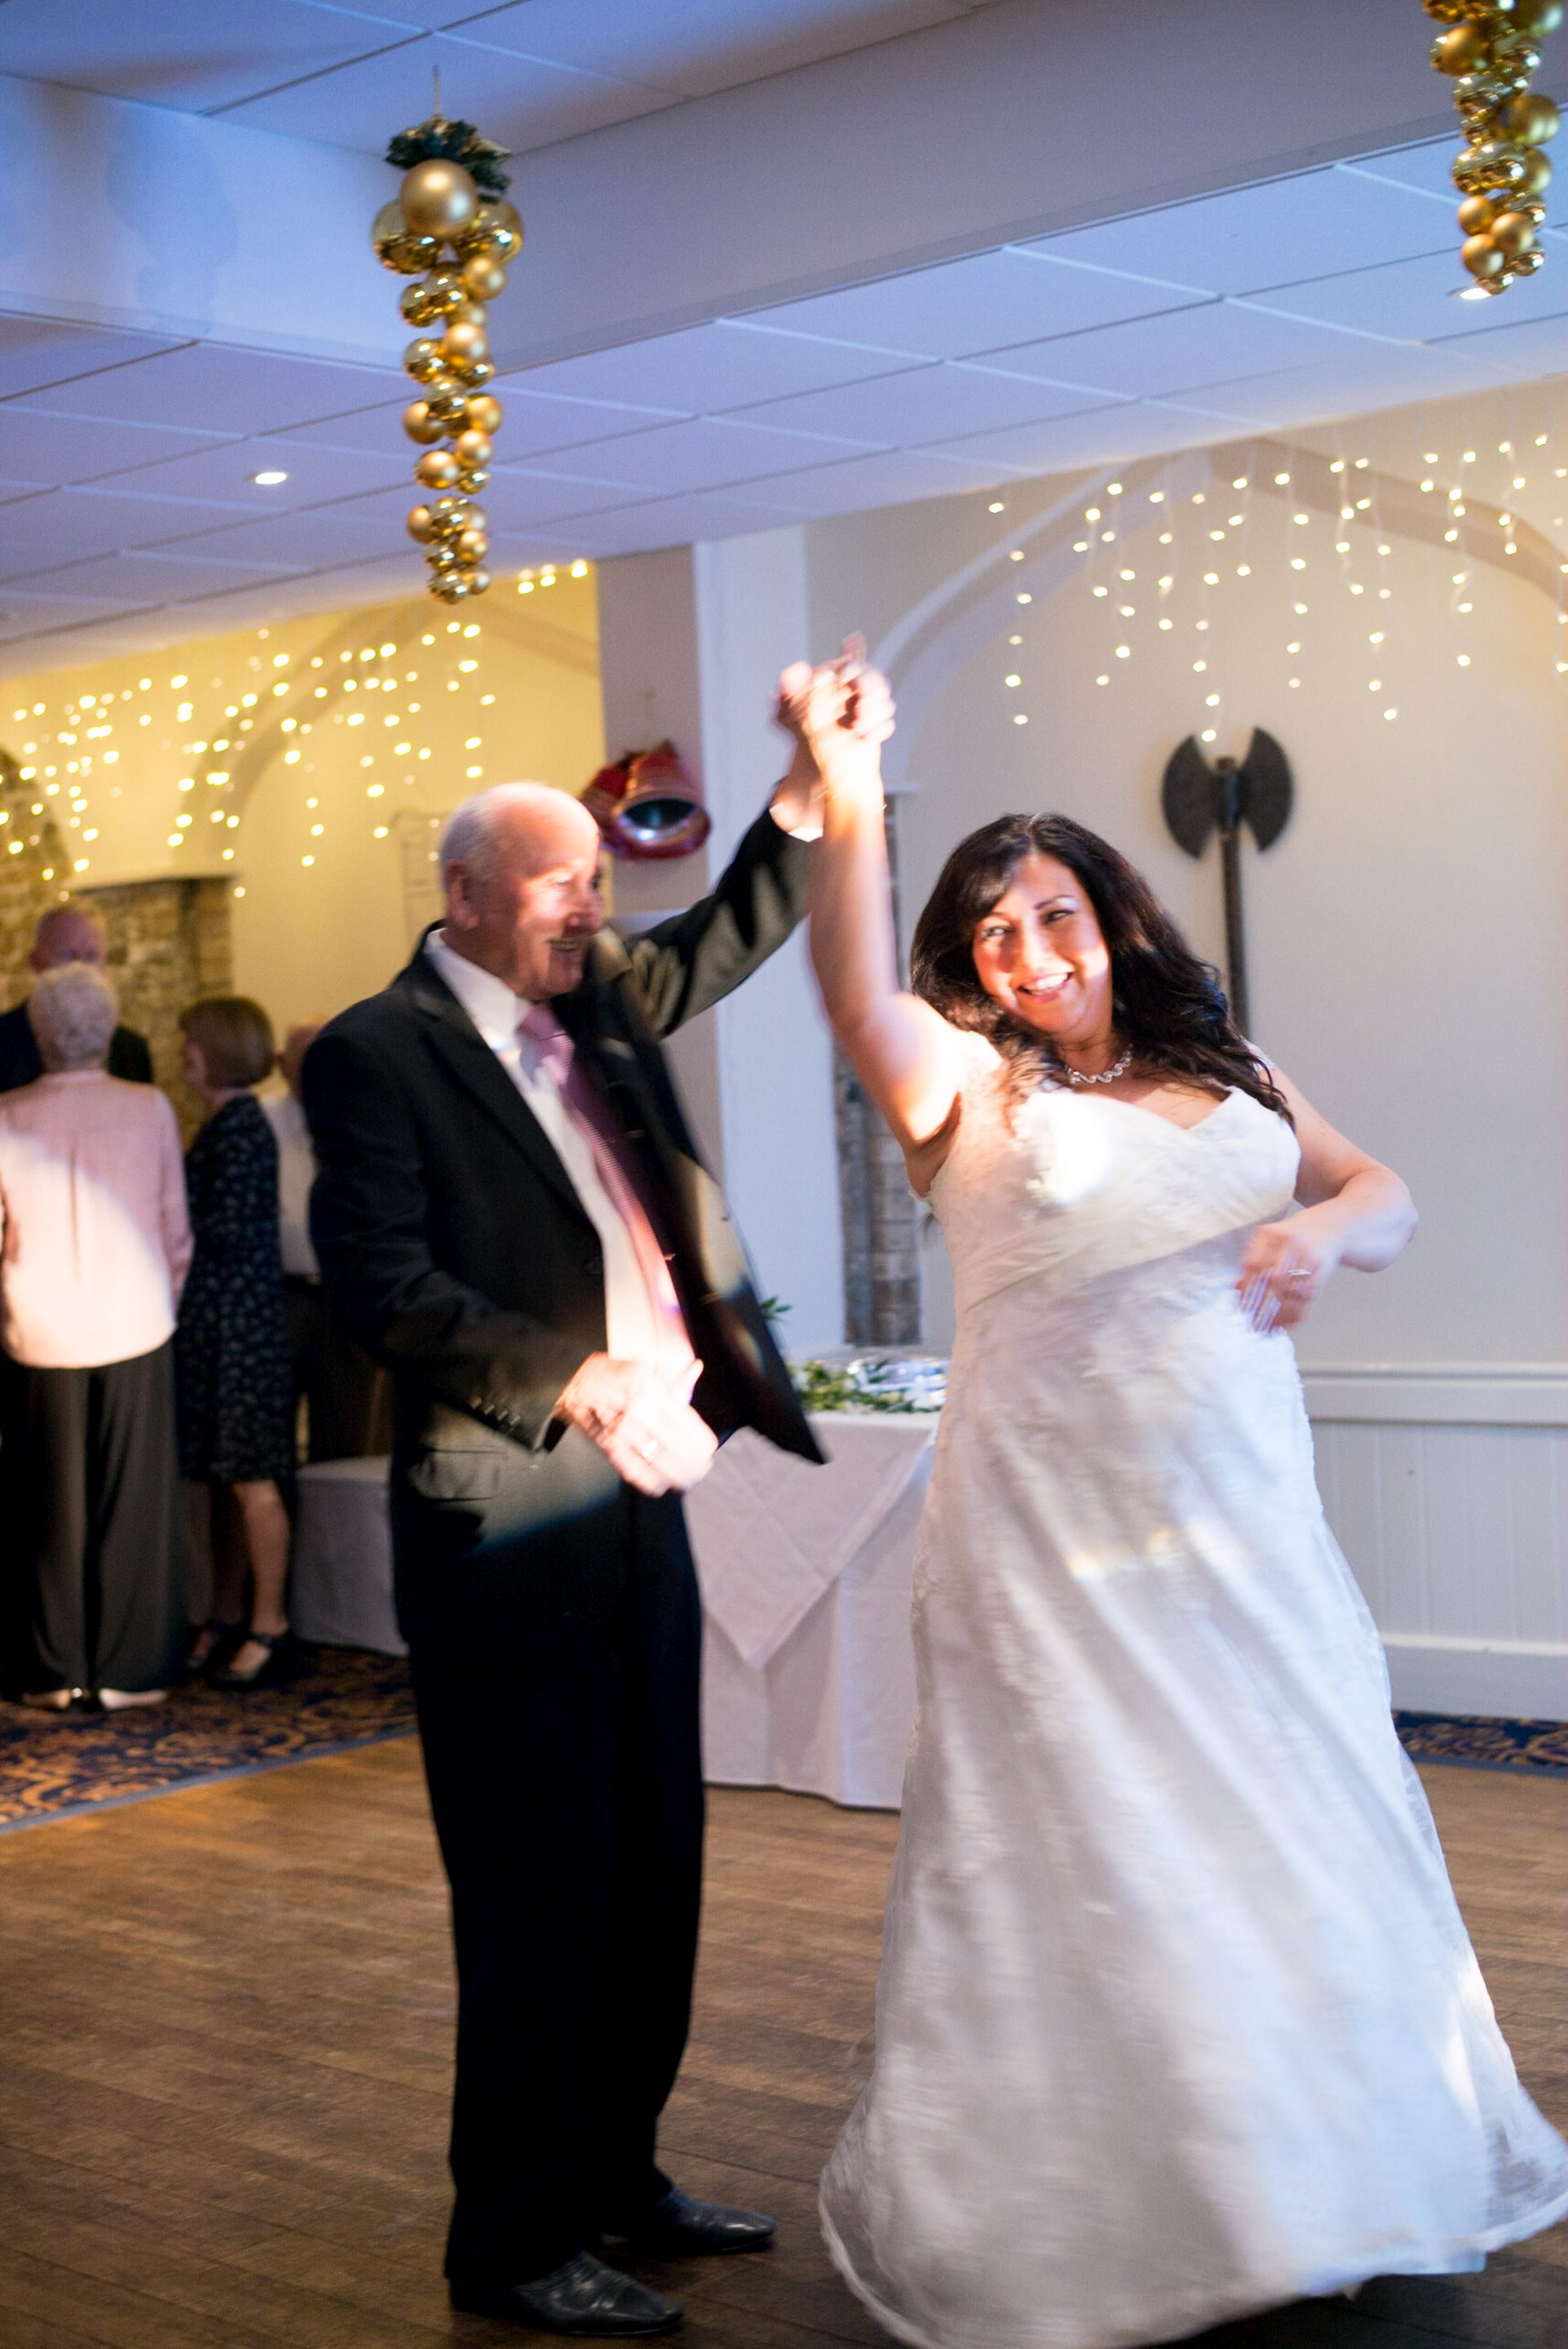 Dance with Dad, yorkshire wedding, first dance